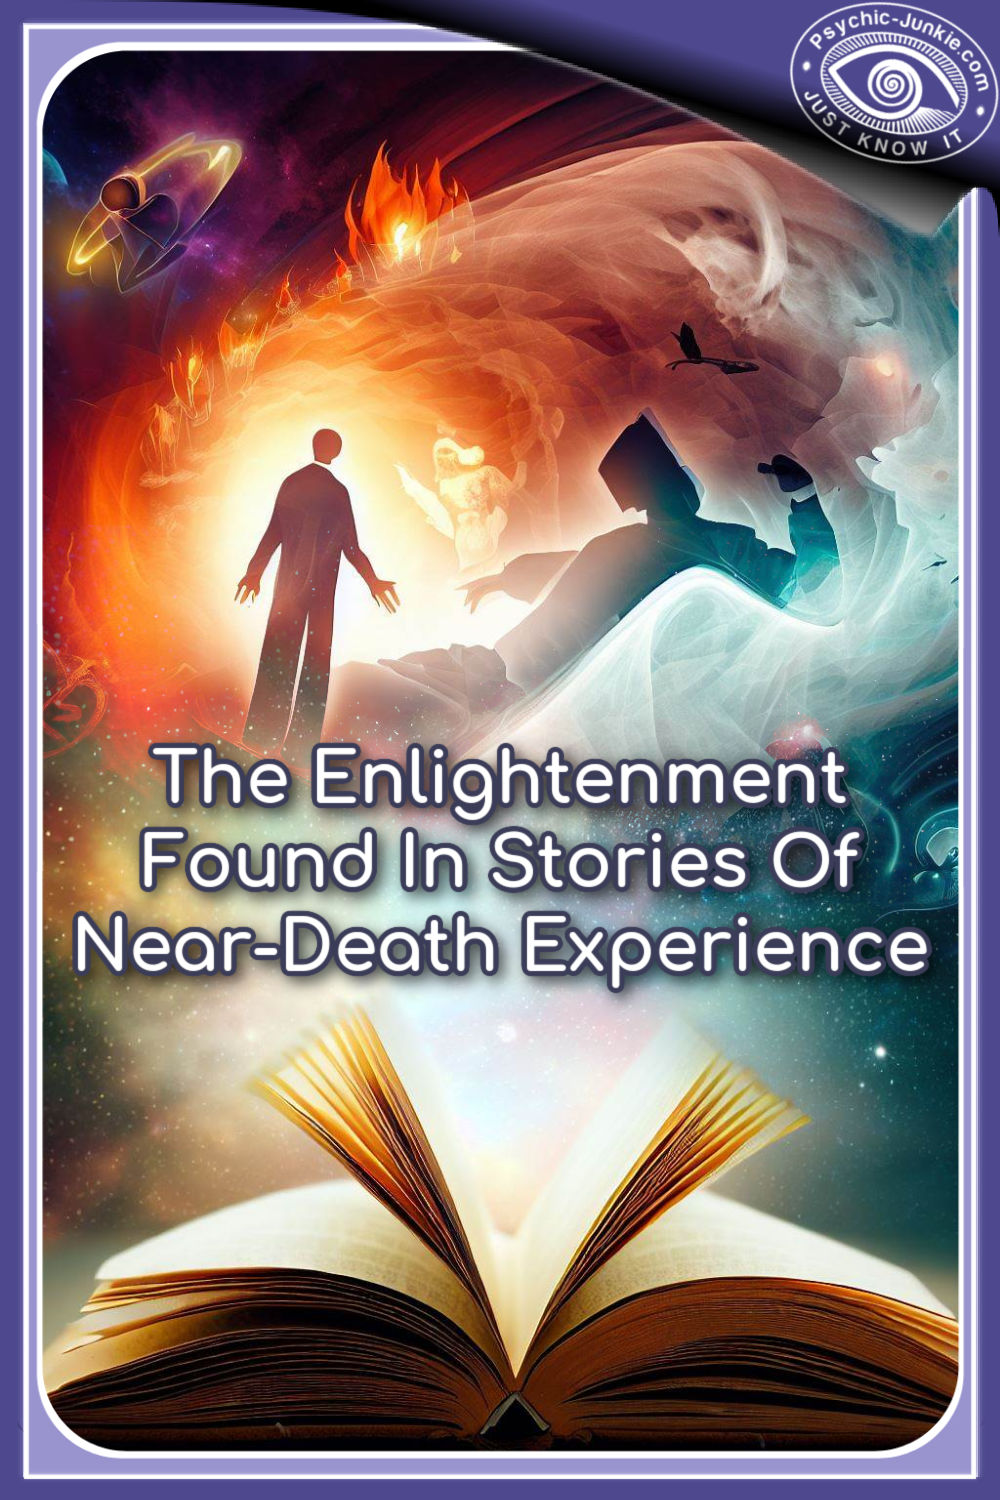 Enlightenment Found In Stories Of Near-Death Experience